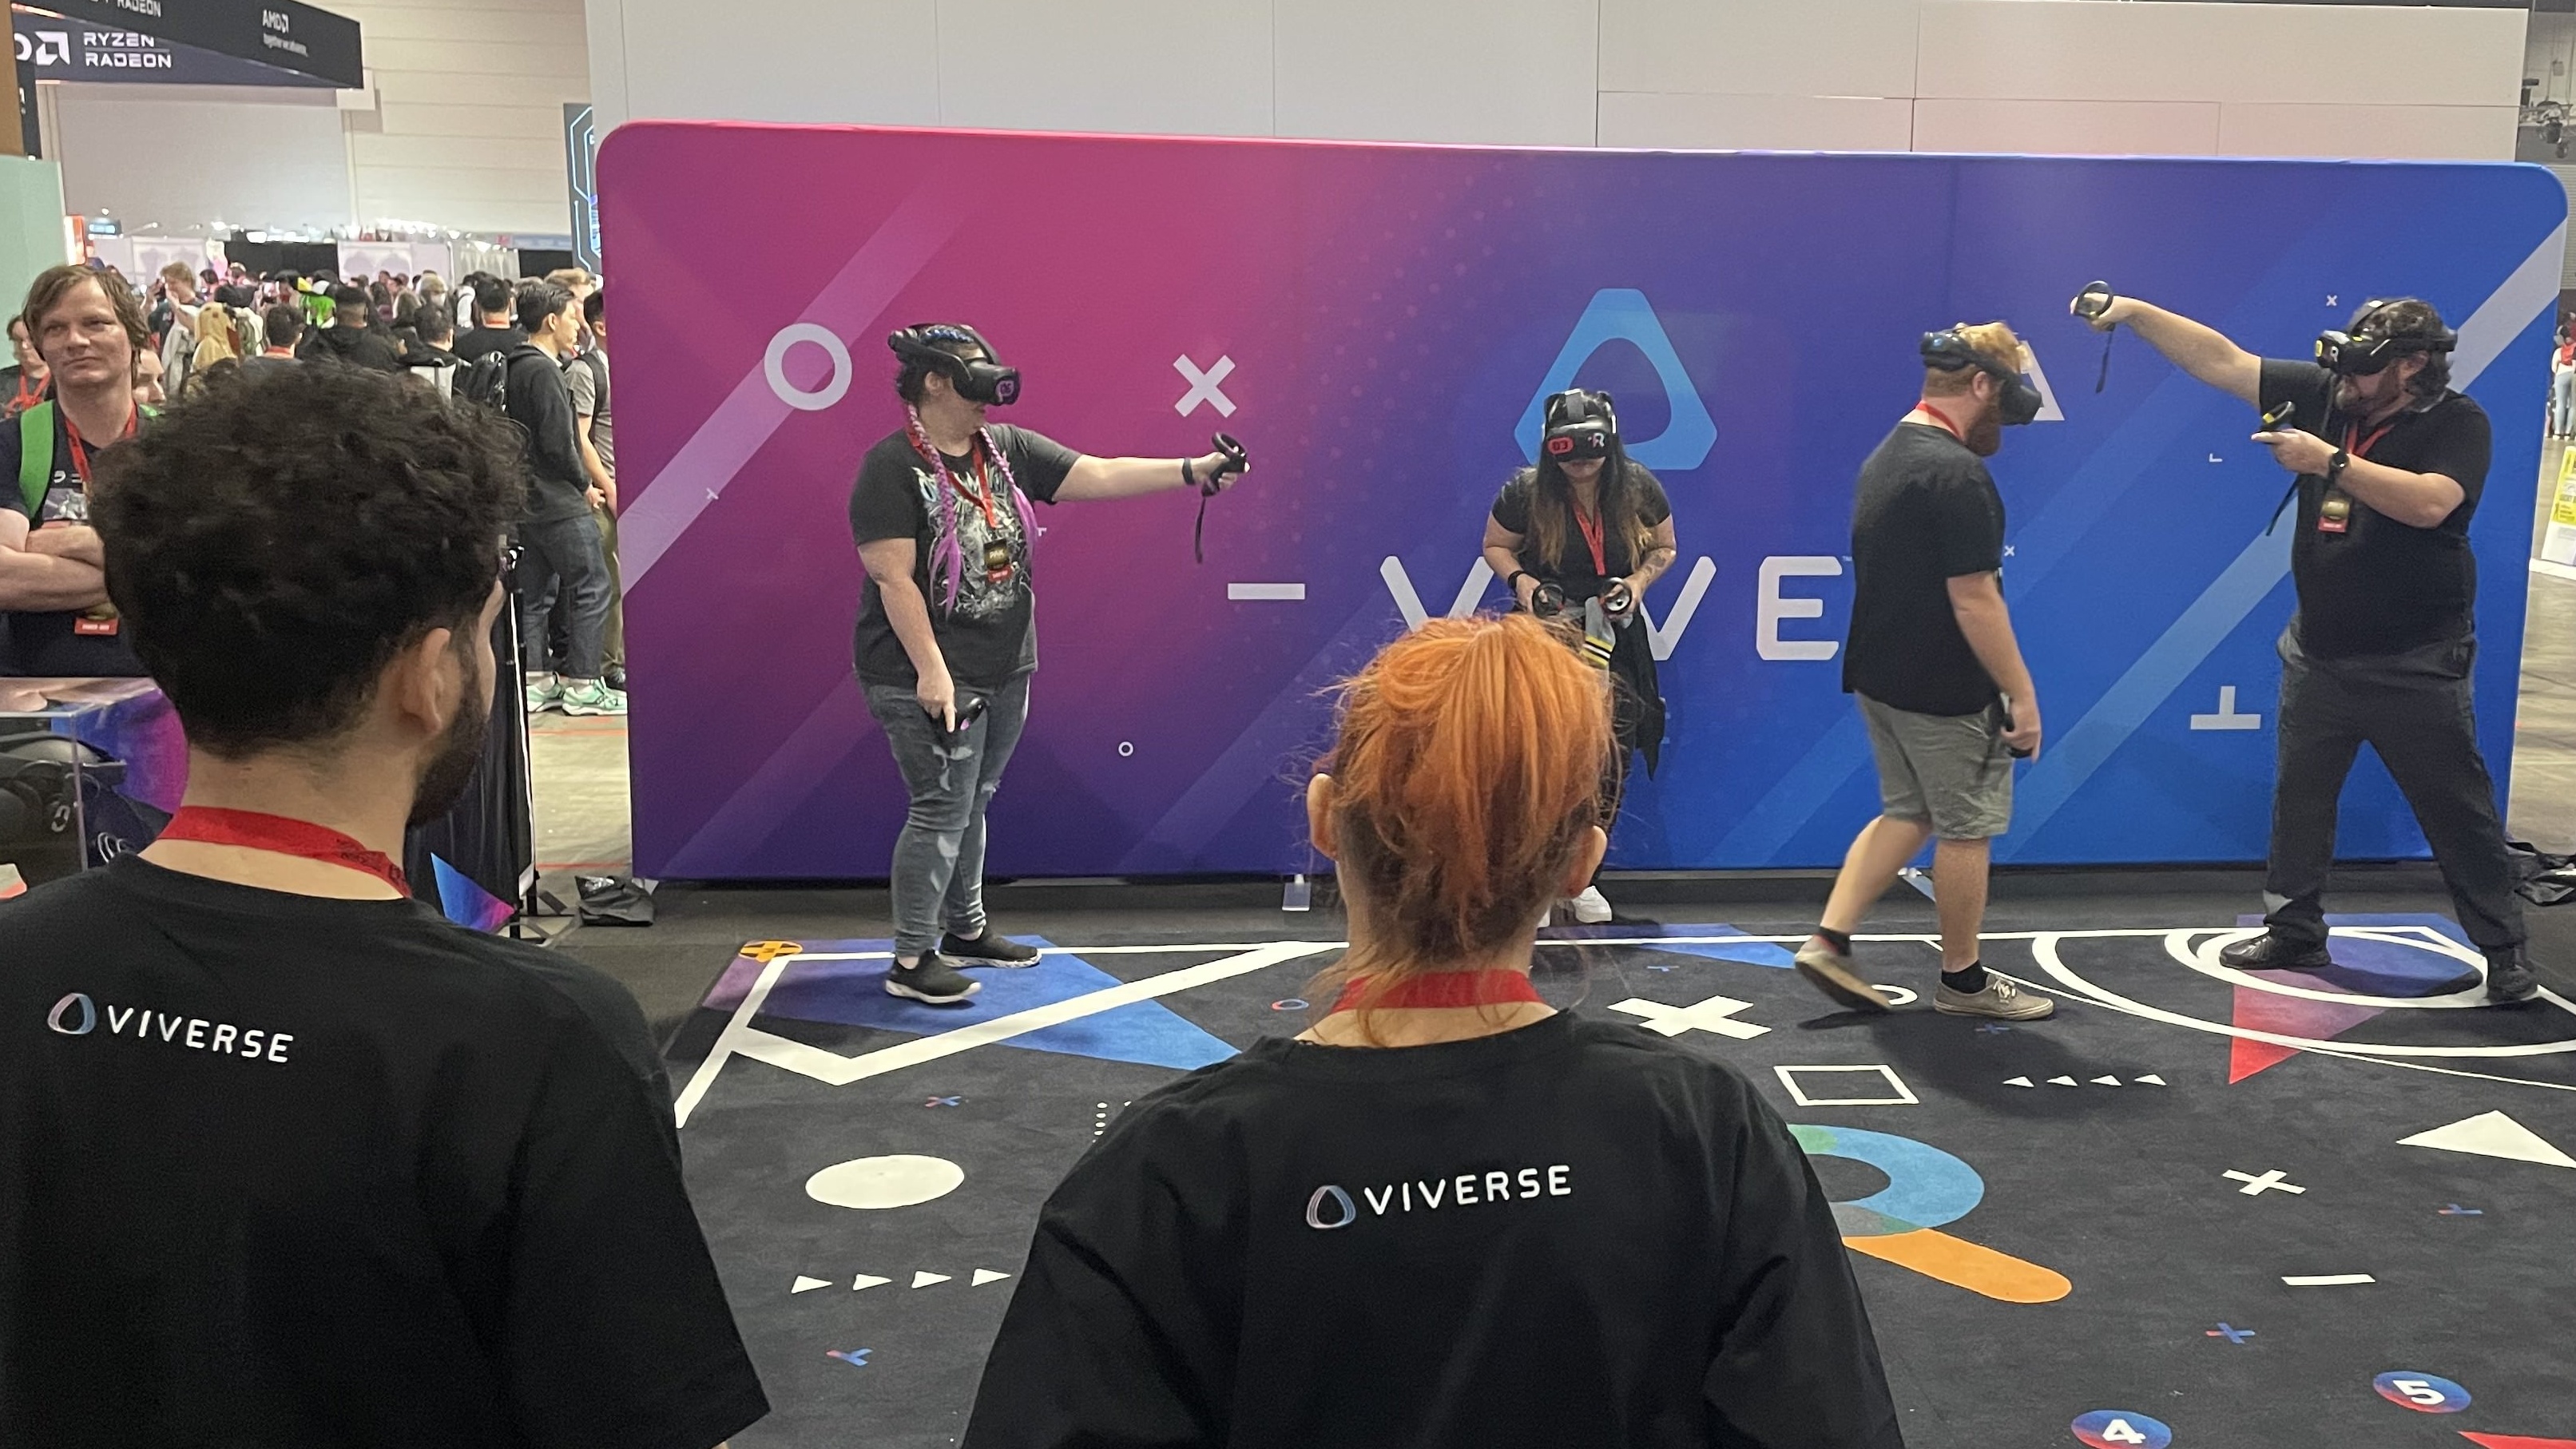 The Vive laser tag booth on the PAX Aus 2022 show floor.